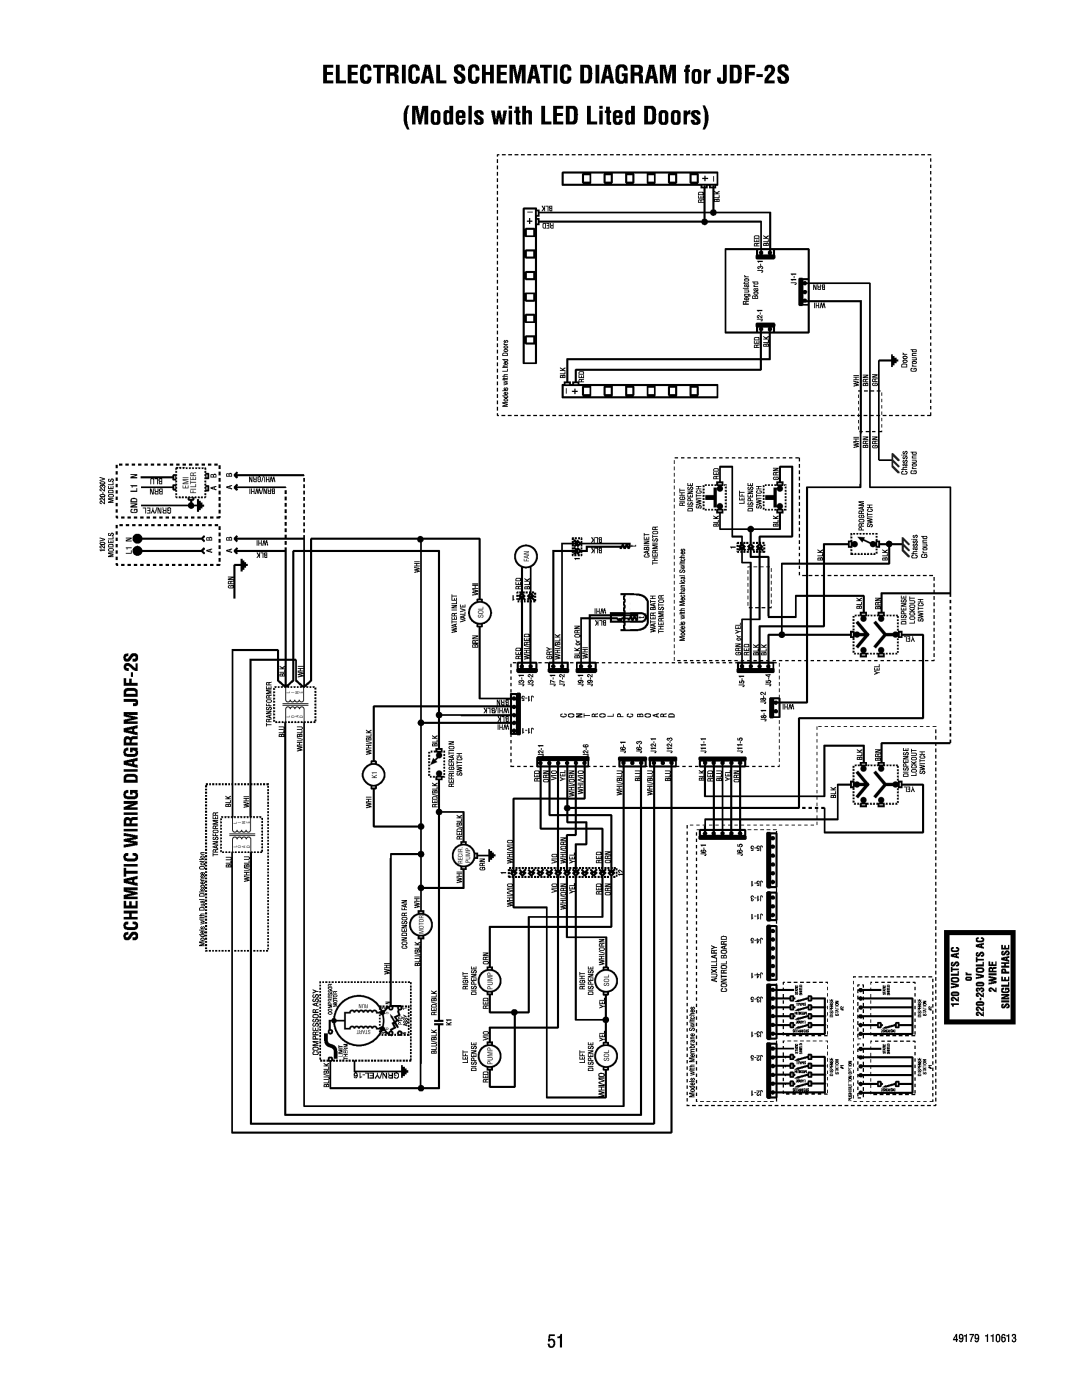 Bunn JDF-4S DIAGRAM for JDF-2S LED Lited Doors, SCHEMATIC WIRING DIAGRAM JDF-2S, ELECTRICAL SCHEMATIC Models with, 49179 